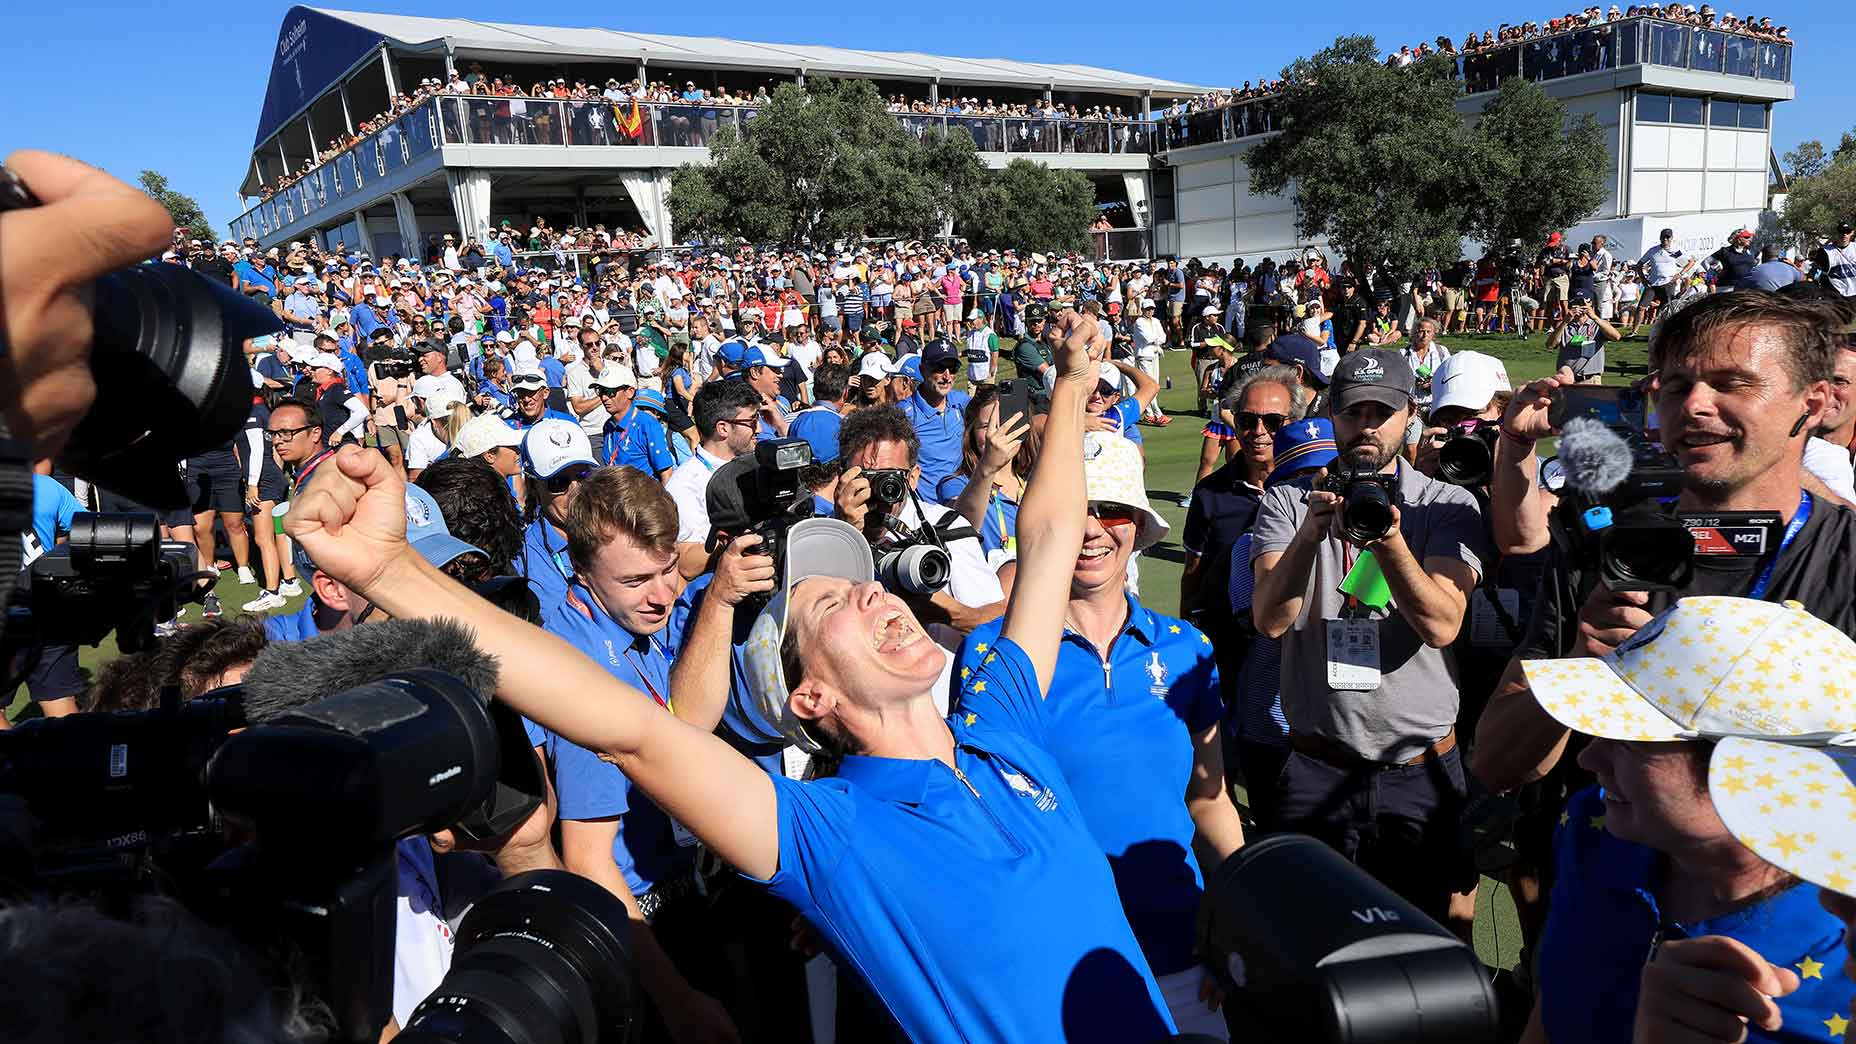 Solheim Cup TV coverage was frustrating, even NBC analysts agree